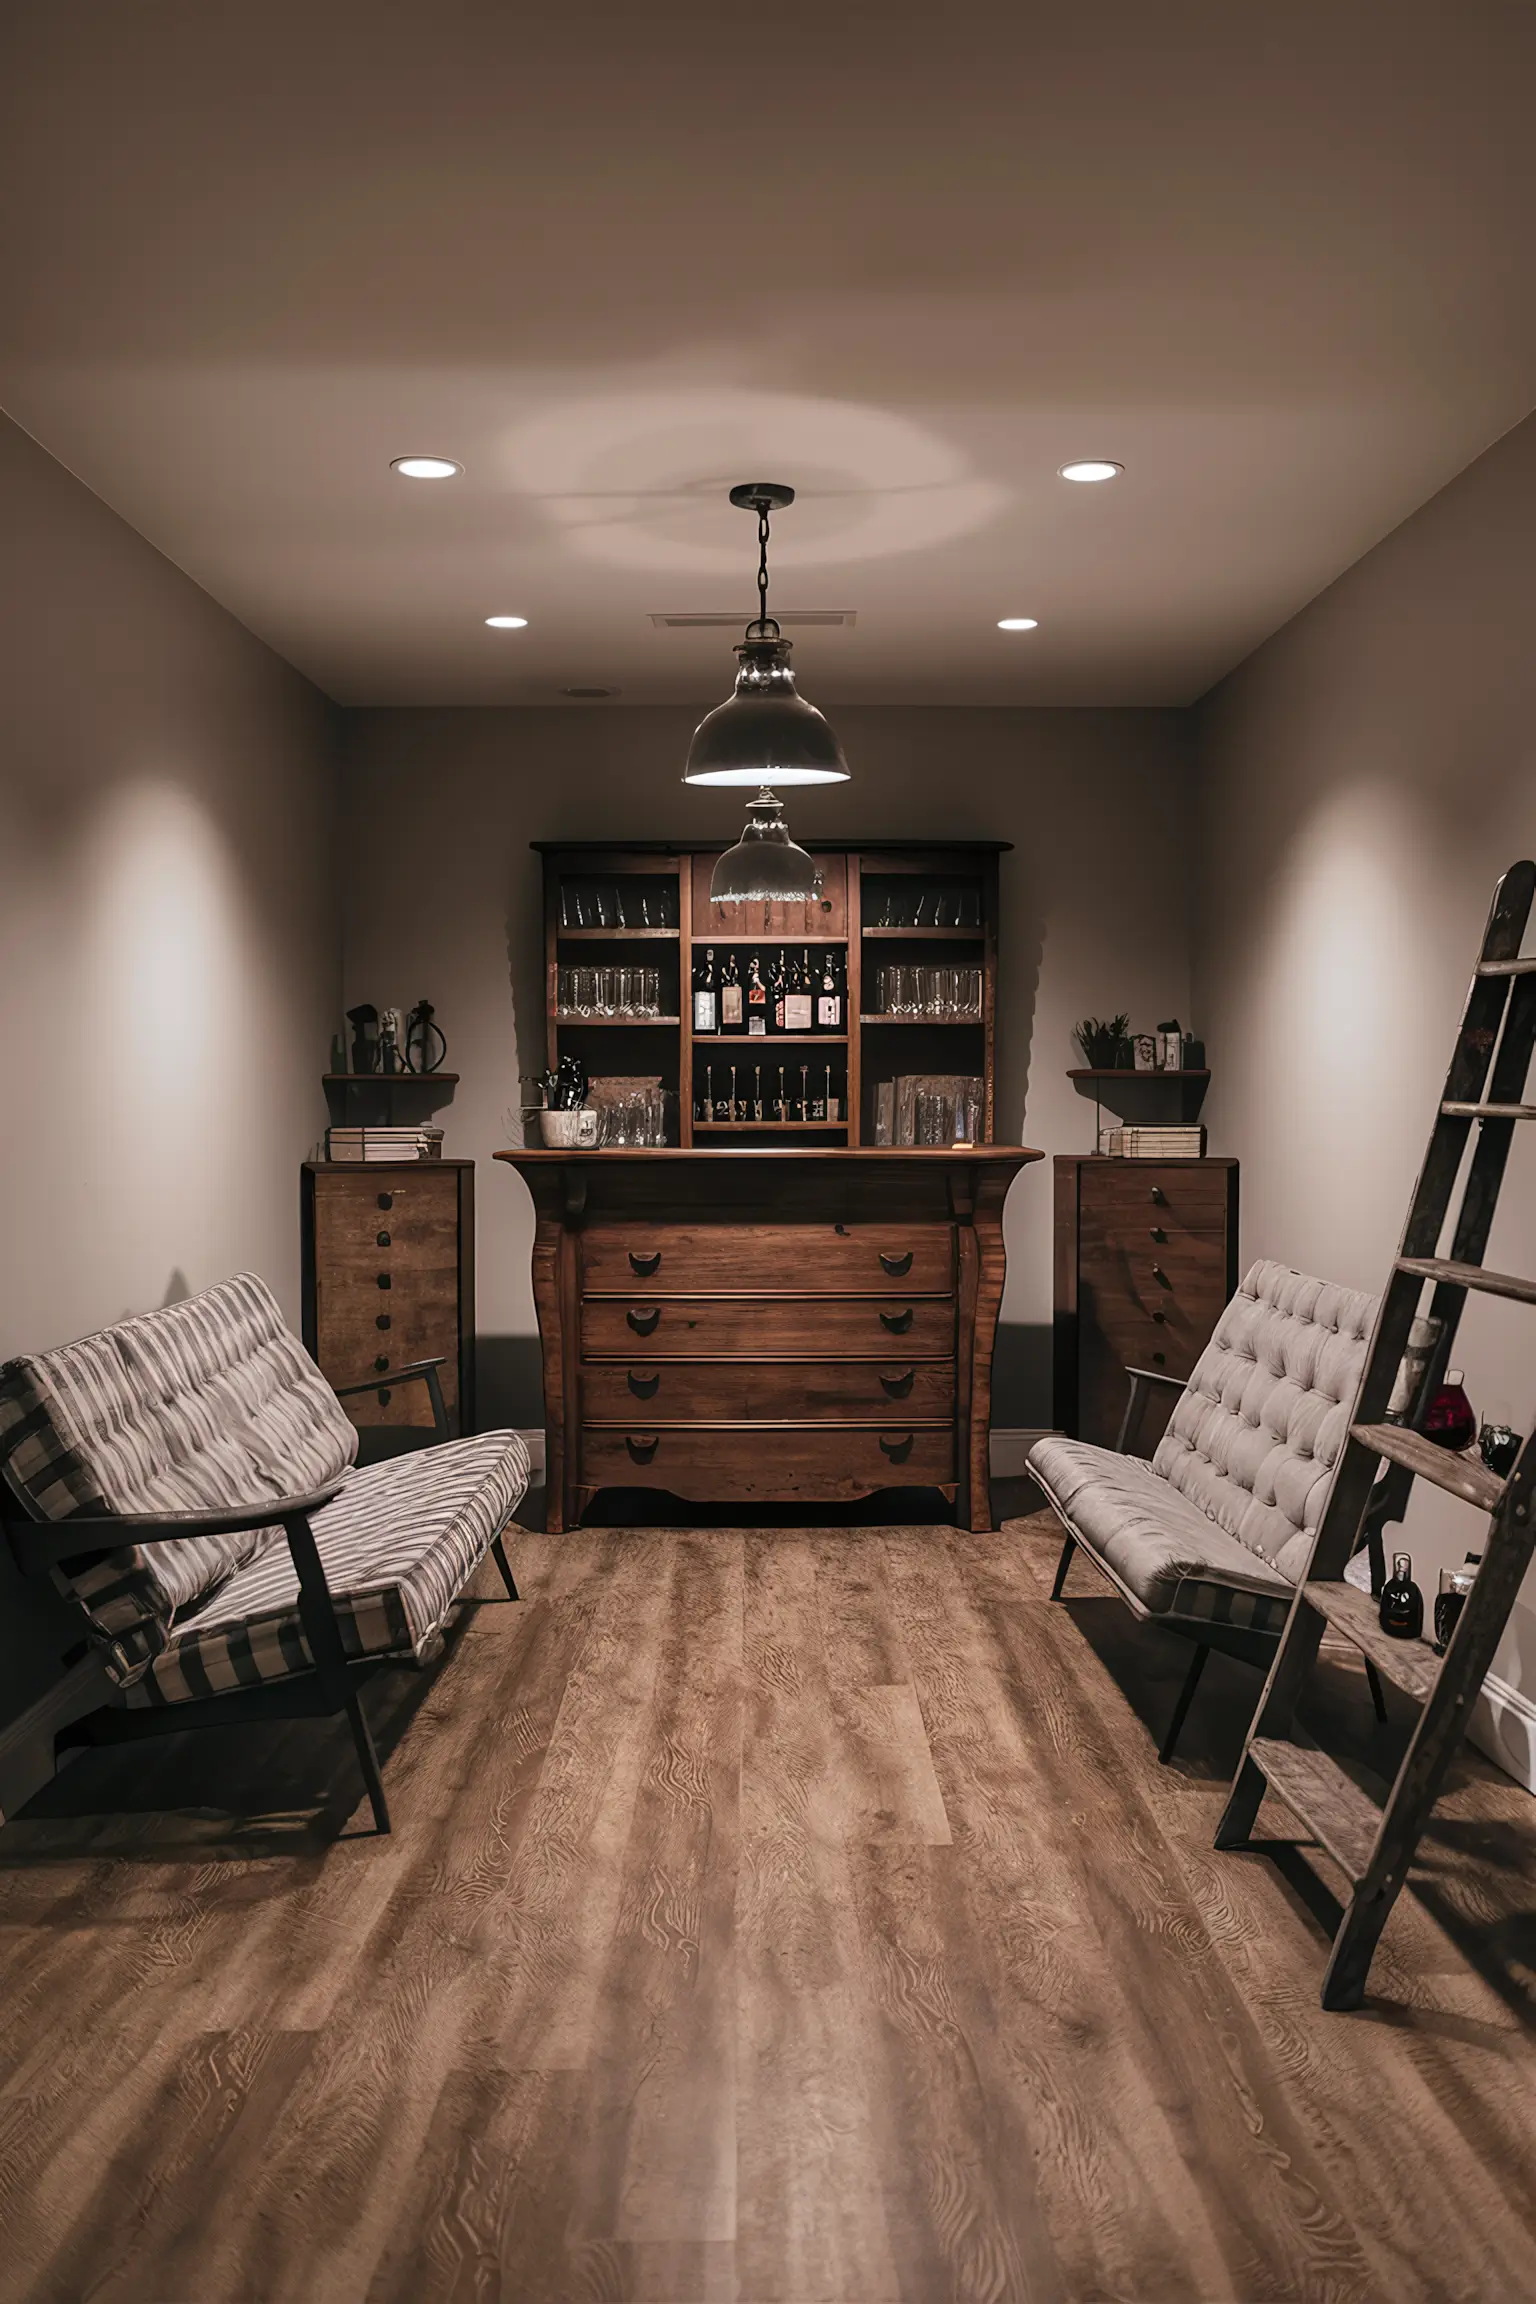 Minimalistic budget-friendly basement remodel with DIY decor and repurposed furniture.